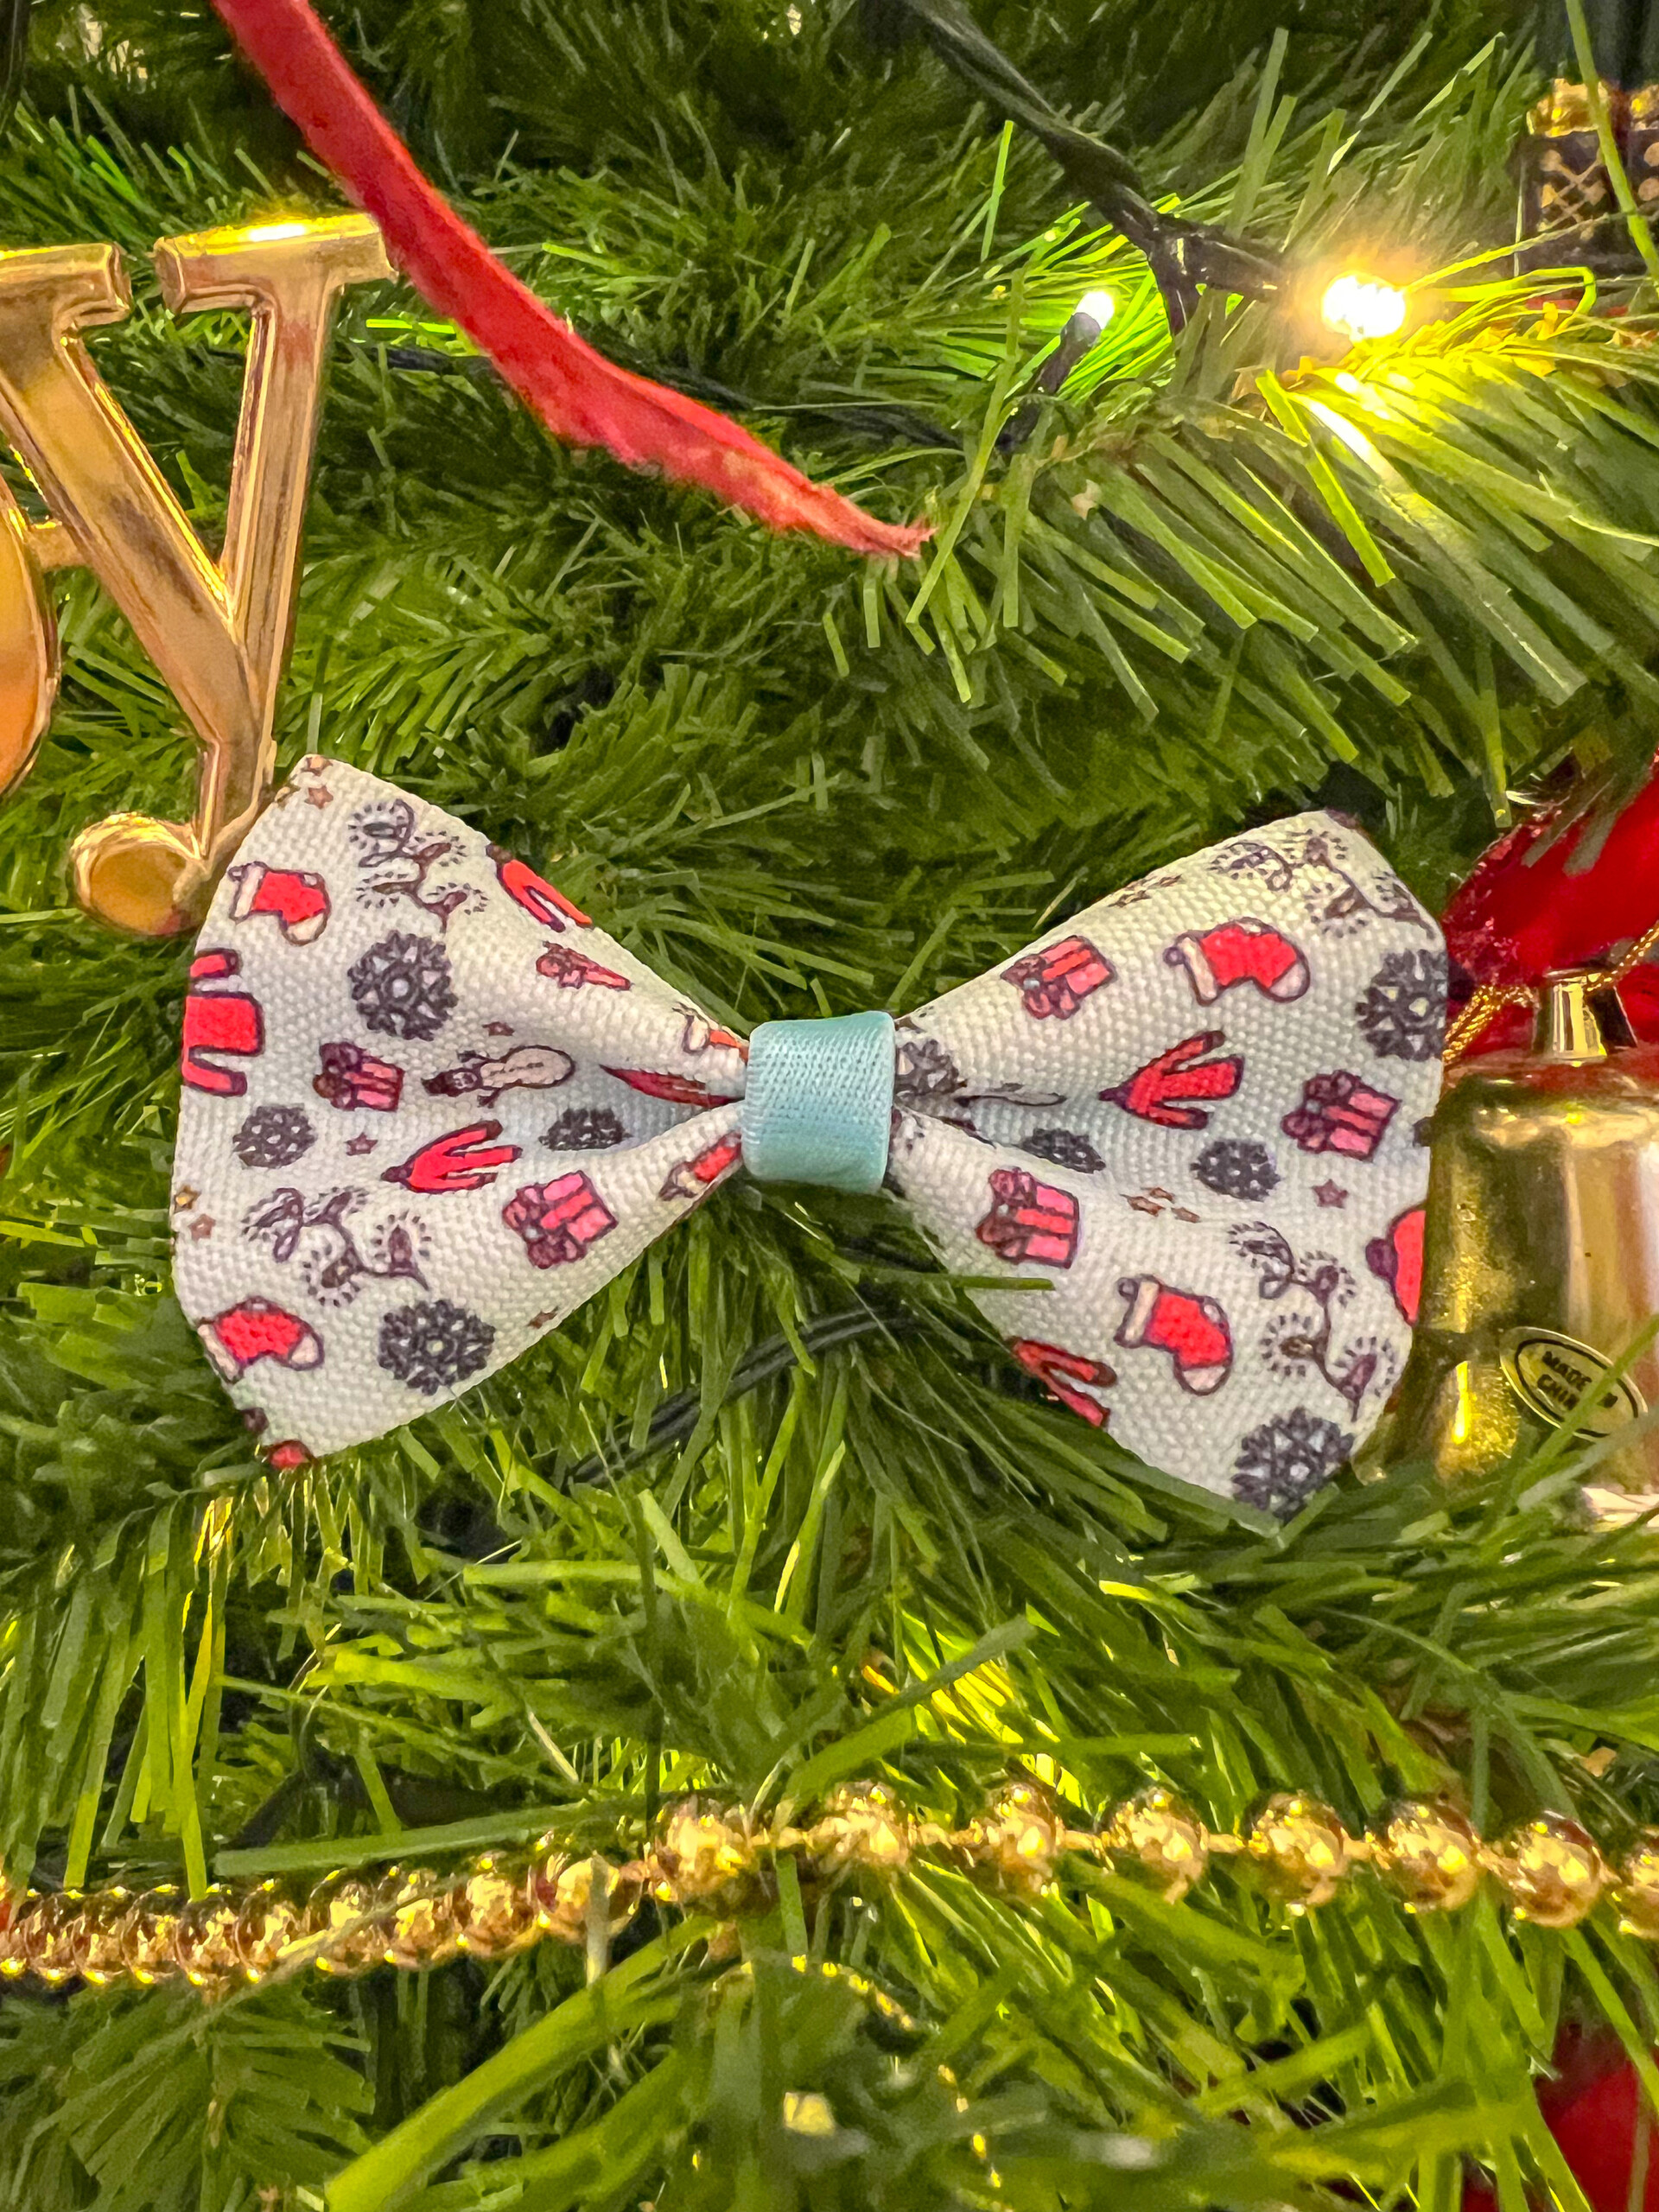 A winter dog bow tie, showing a festive and snow scene, placed on a Christmas tree amongst decorations